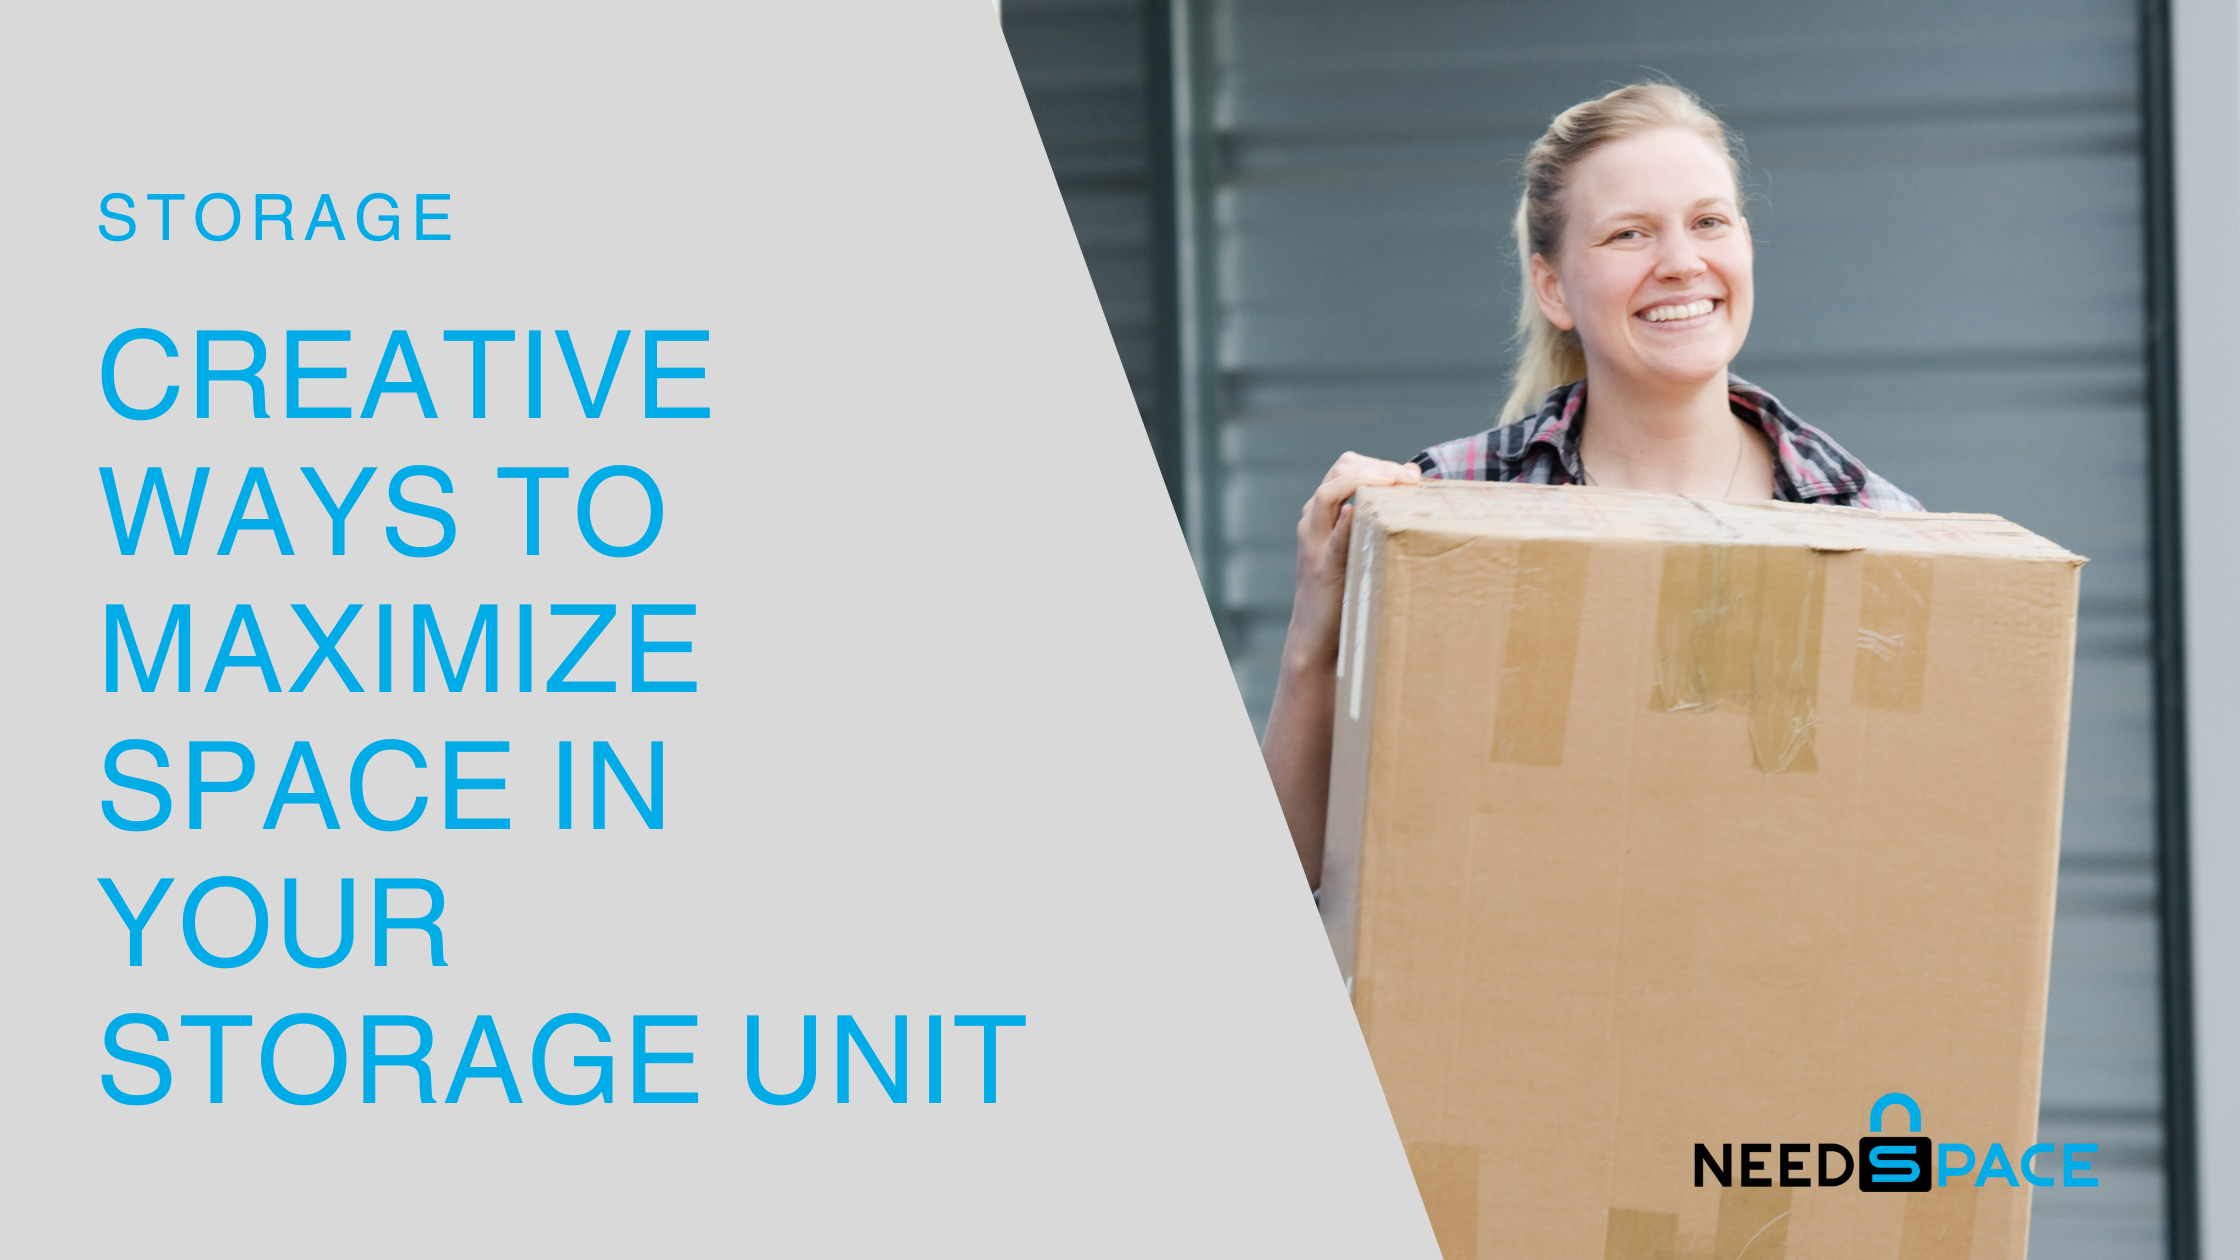 Creative Ways to Maximize Space in Your Storage Unit